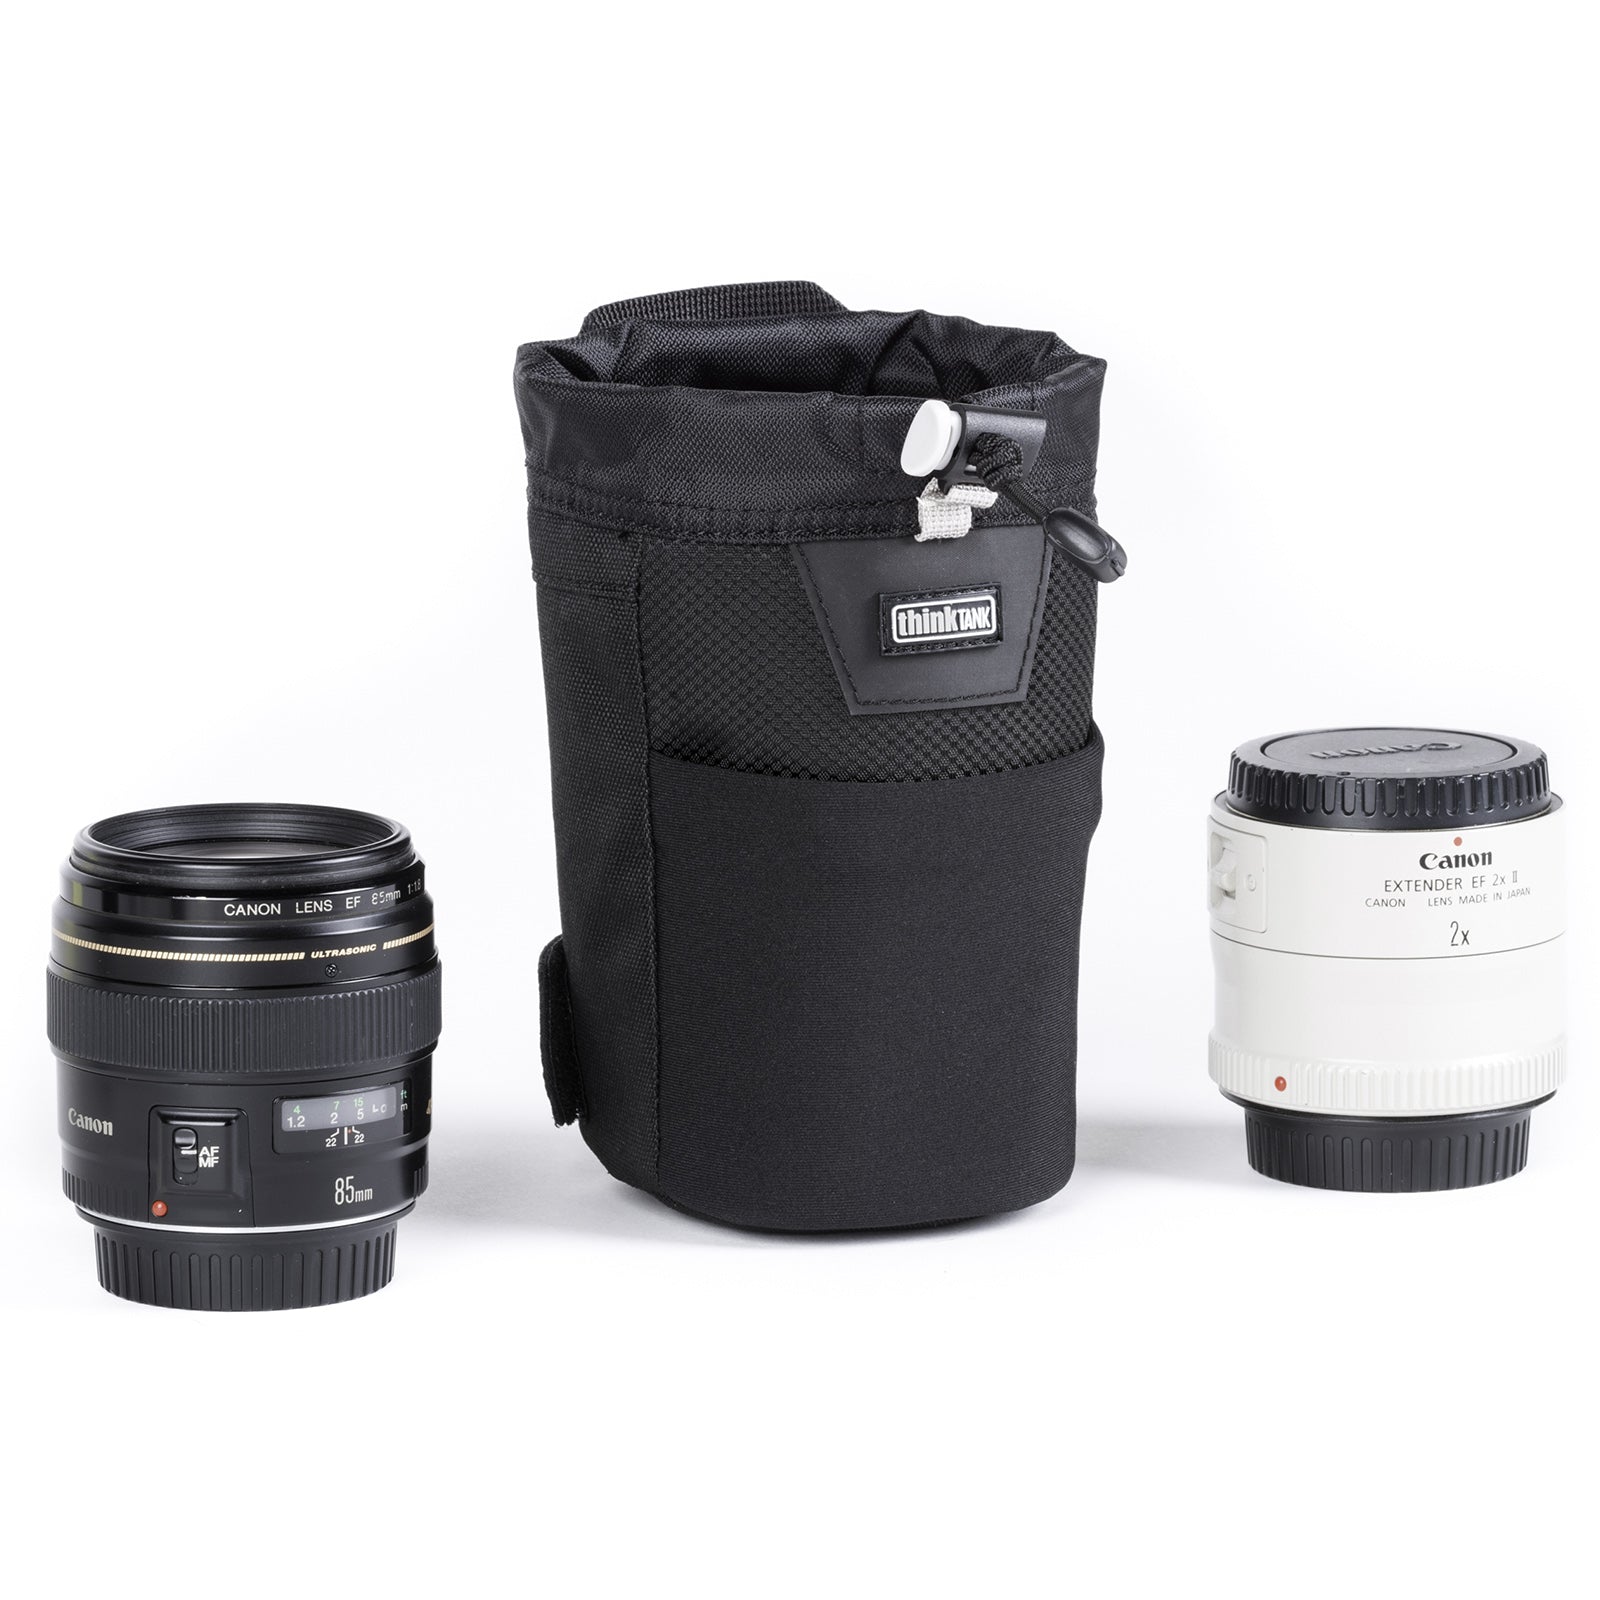 Fits smaller lenses such as 50mm f/1.4, 85mm f/1.8 and teleconverters